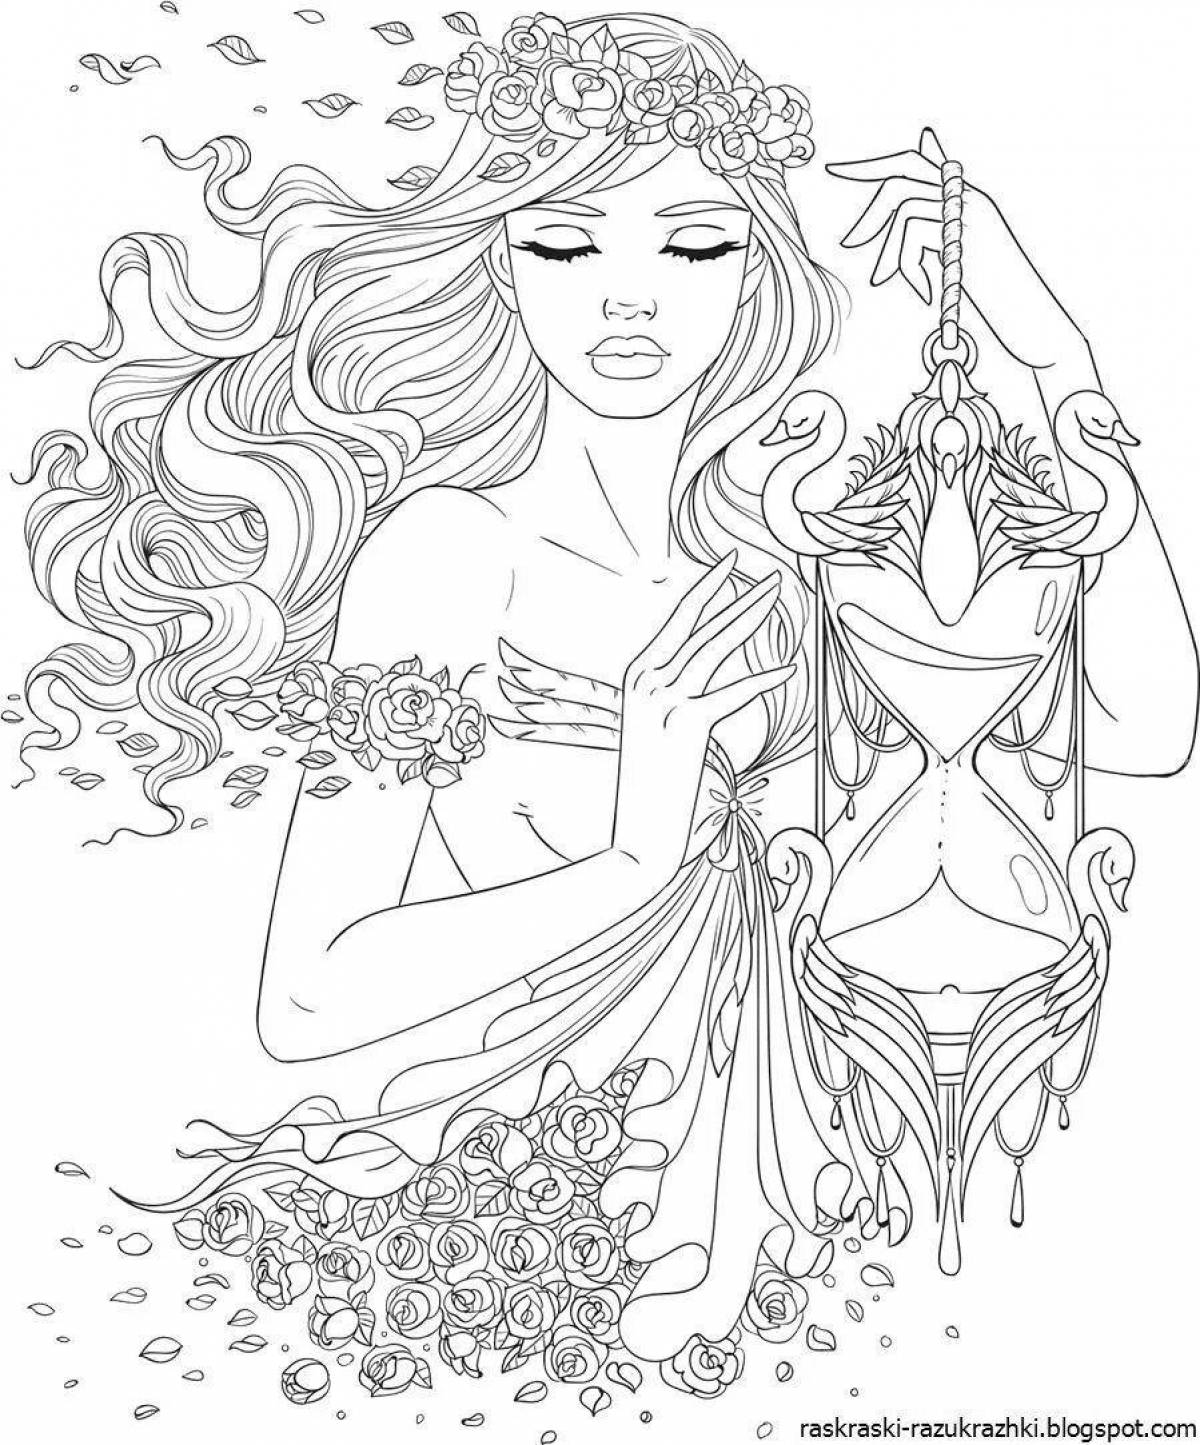 Coloring Pages with People Awesome Coloring Pages Coloring Pages Of People  S Faces – Meriwer Coloring